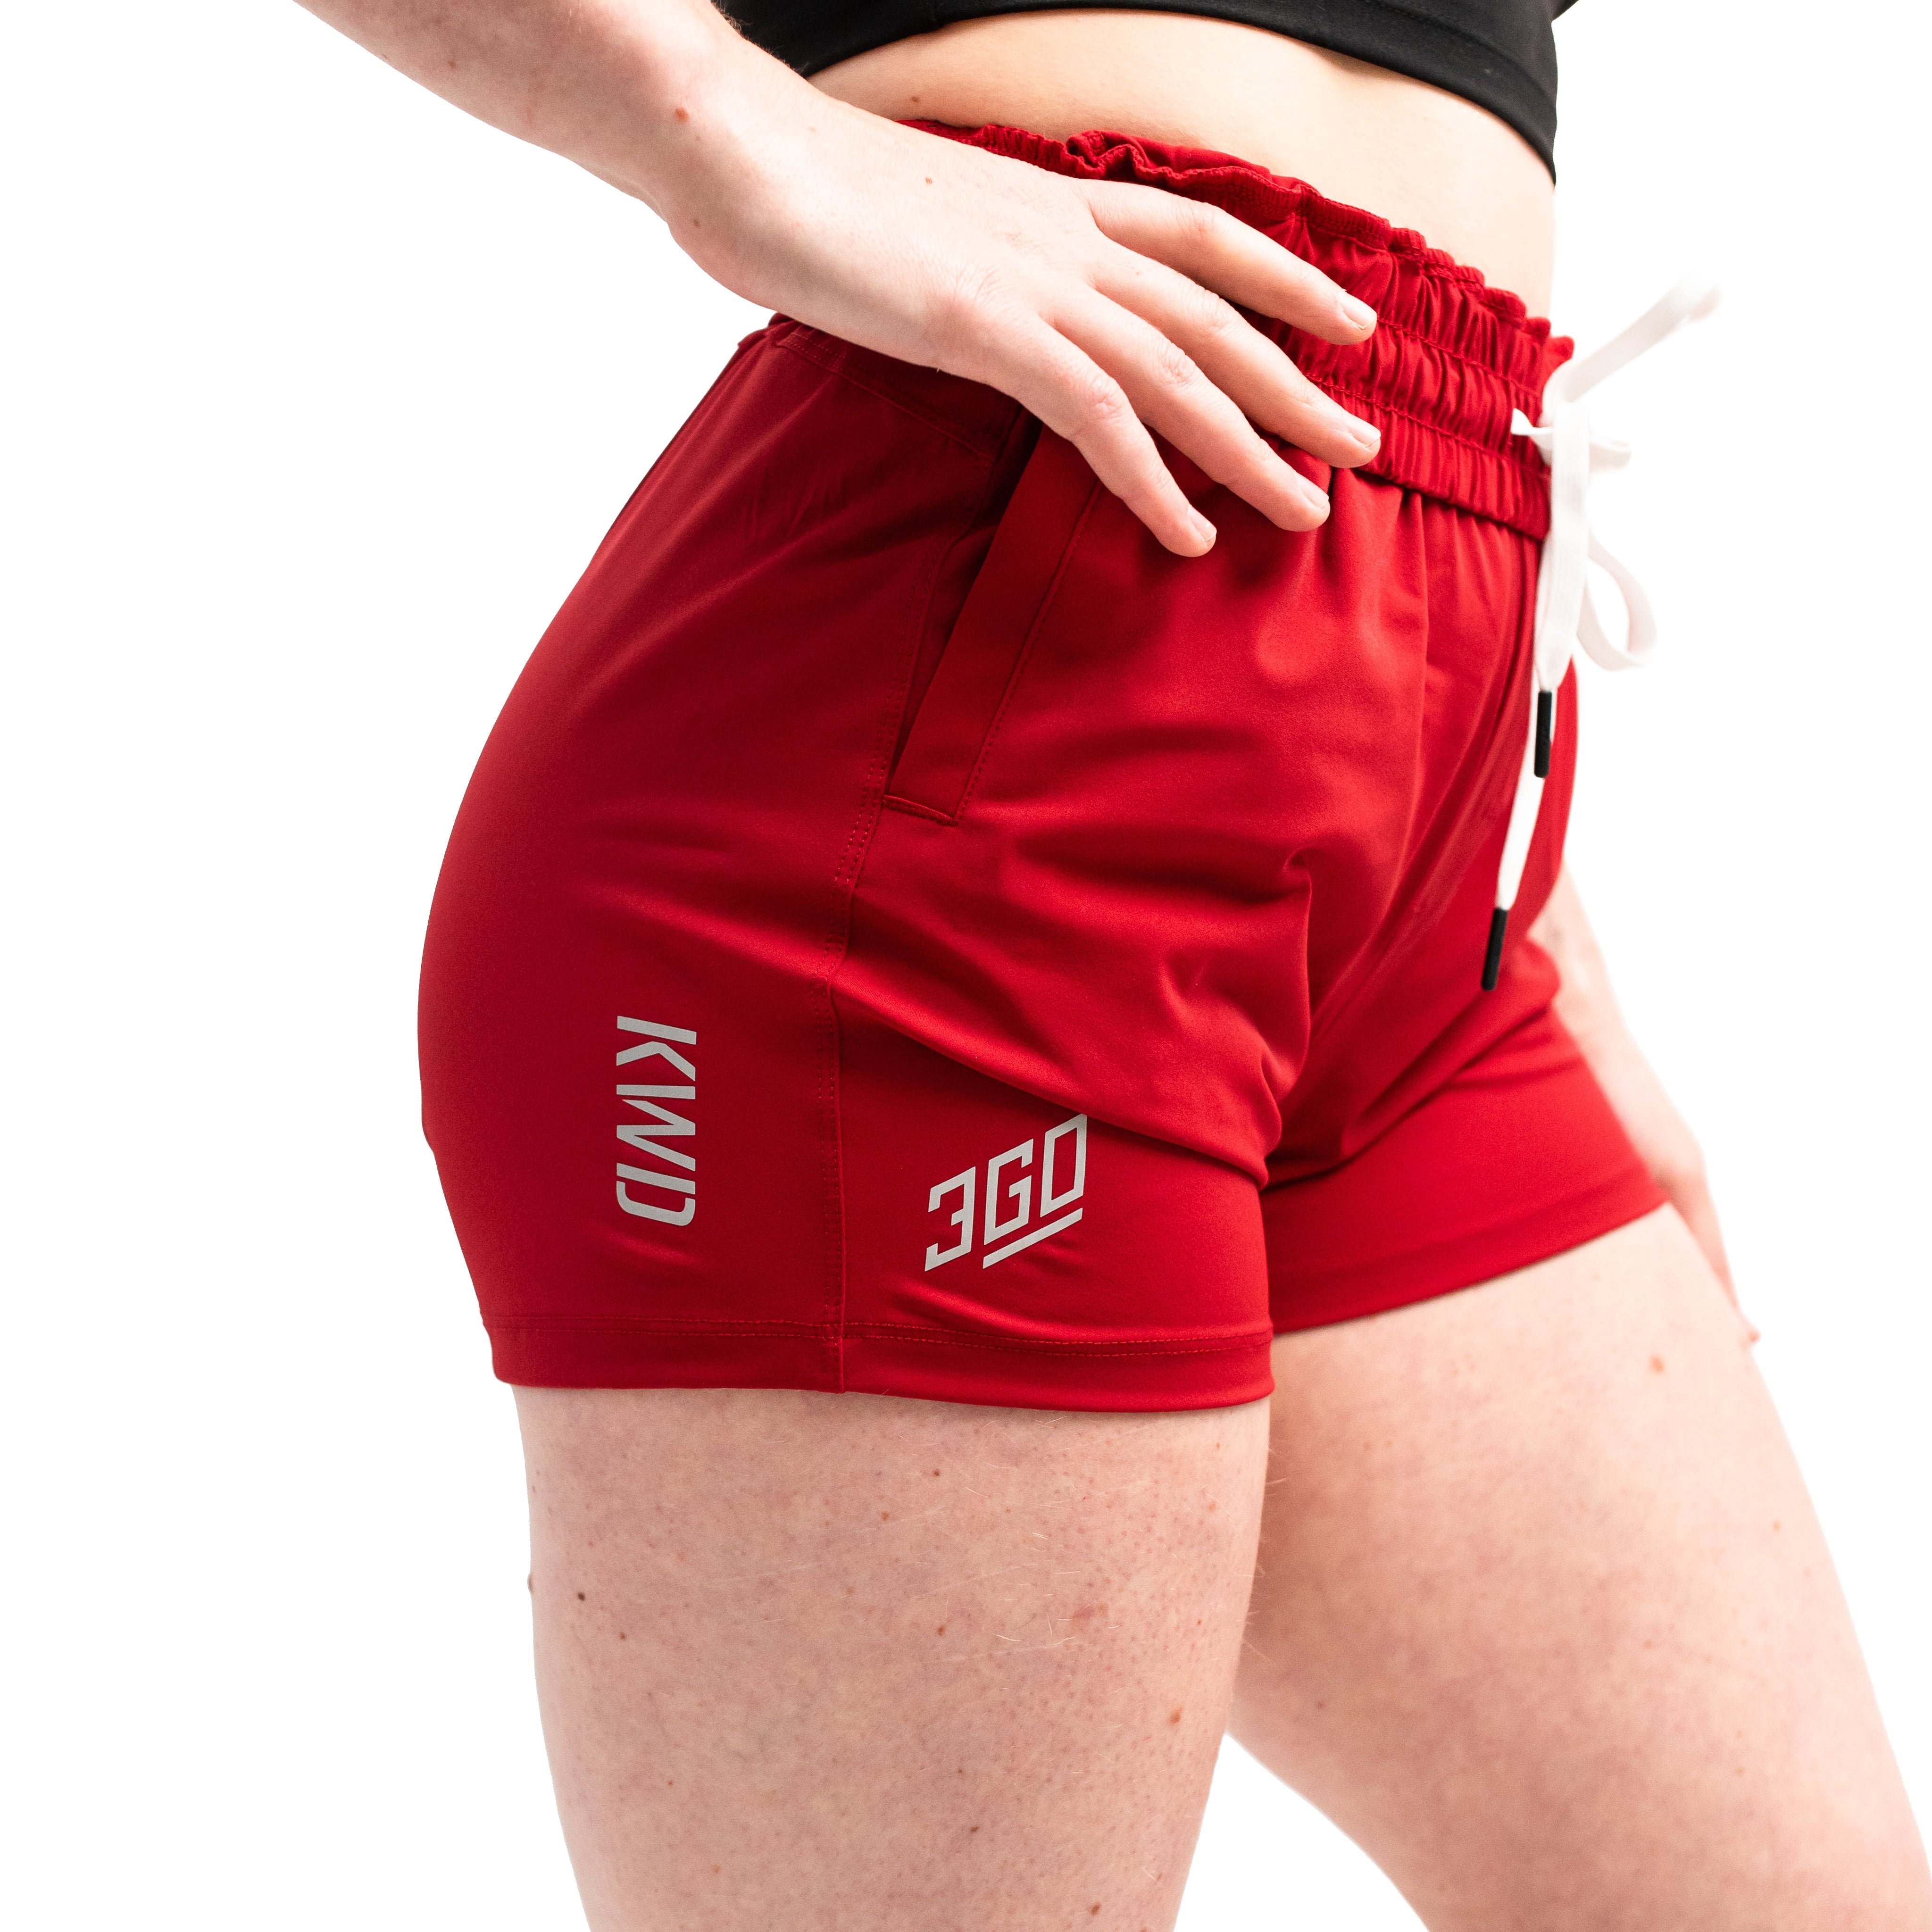 In life, the challenges we all face take Courage and Honour. This red was chosen for 360Go KWD Shorts to represent the courage we apply to become stronger than before. These shorts offer 360 degrees of stretch in all angles and allow you to remain comfortable without limiting any movement in both training and life environments.